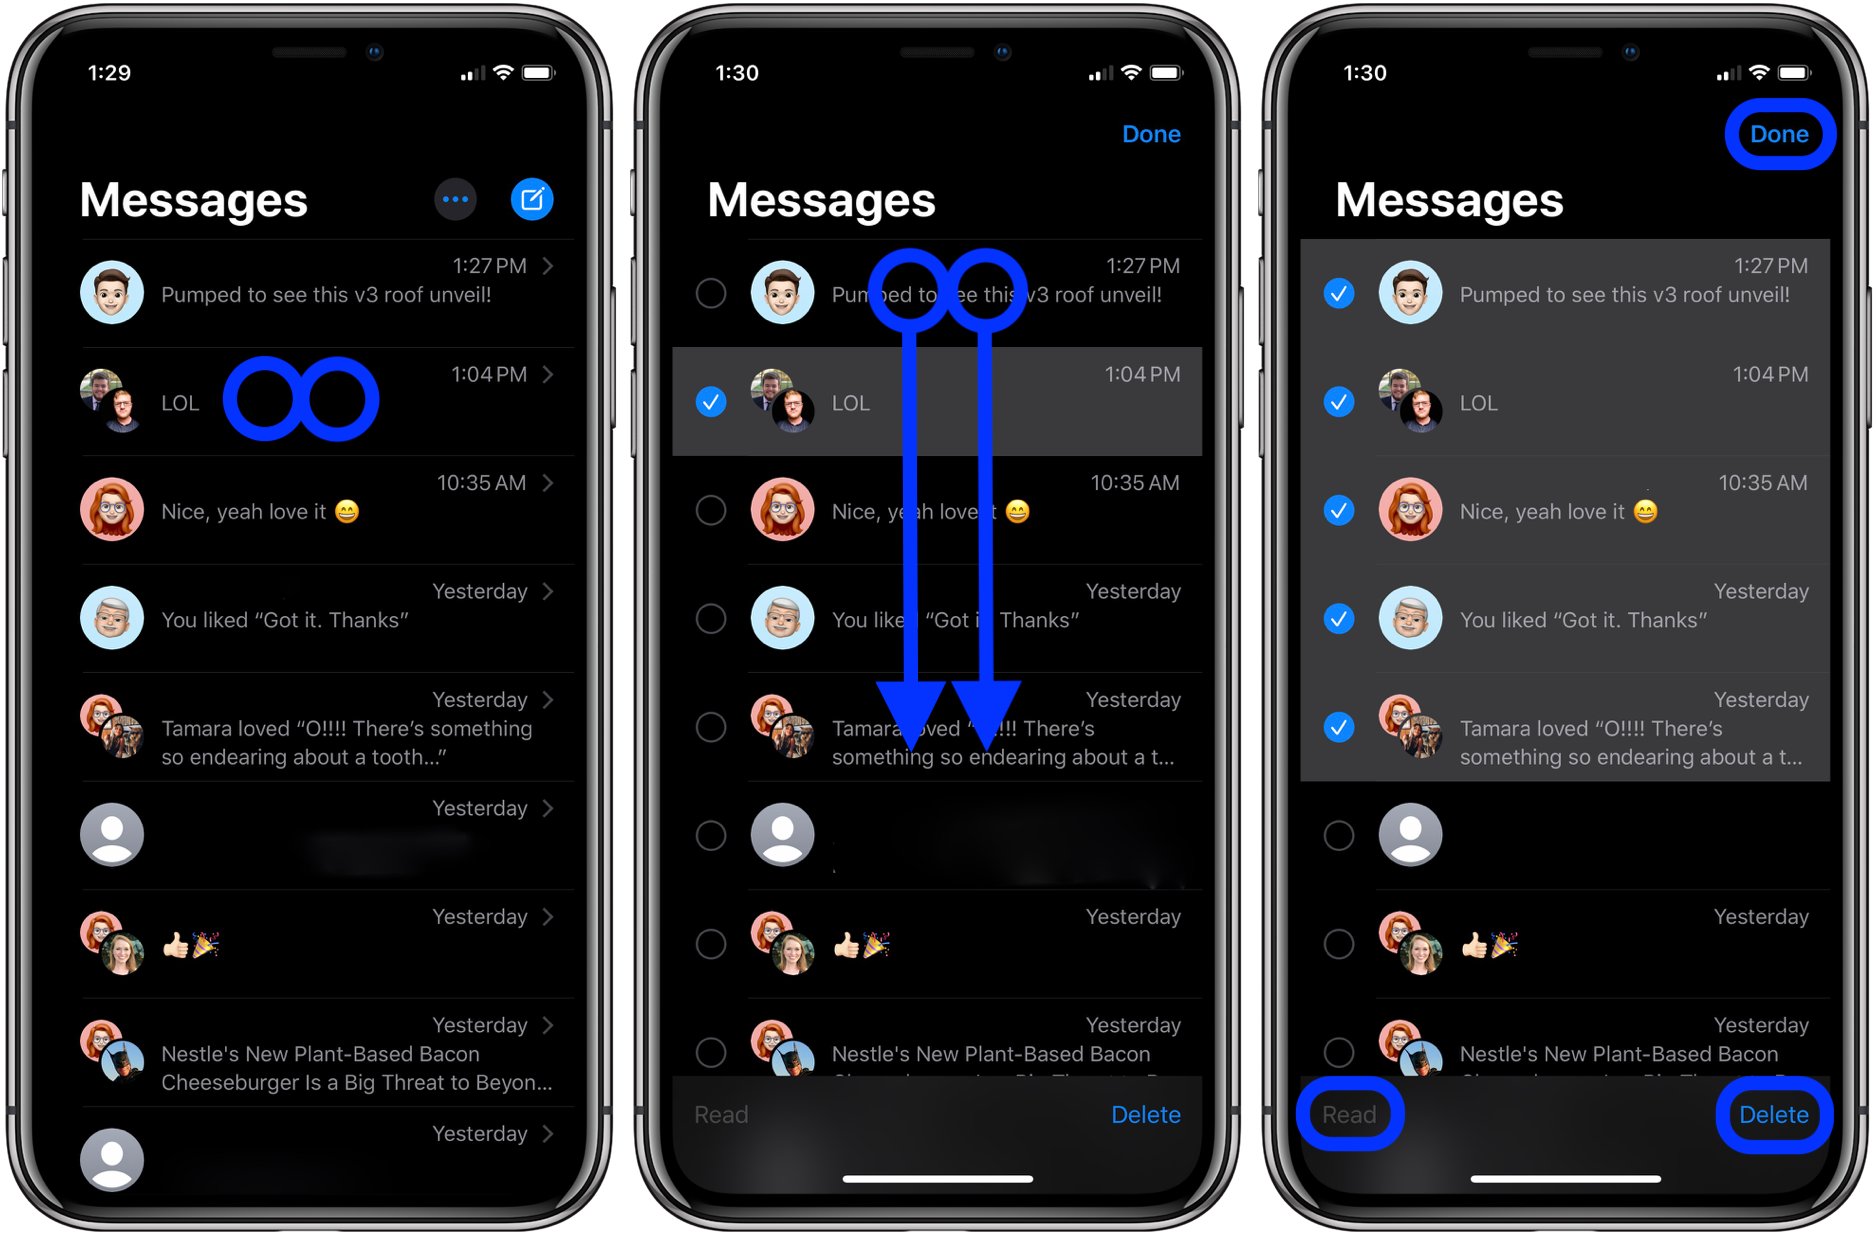 how-to-manage-messages-on-iphone-and-ipad-using-two-finger-tap